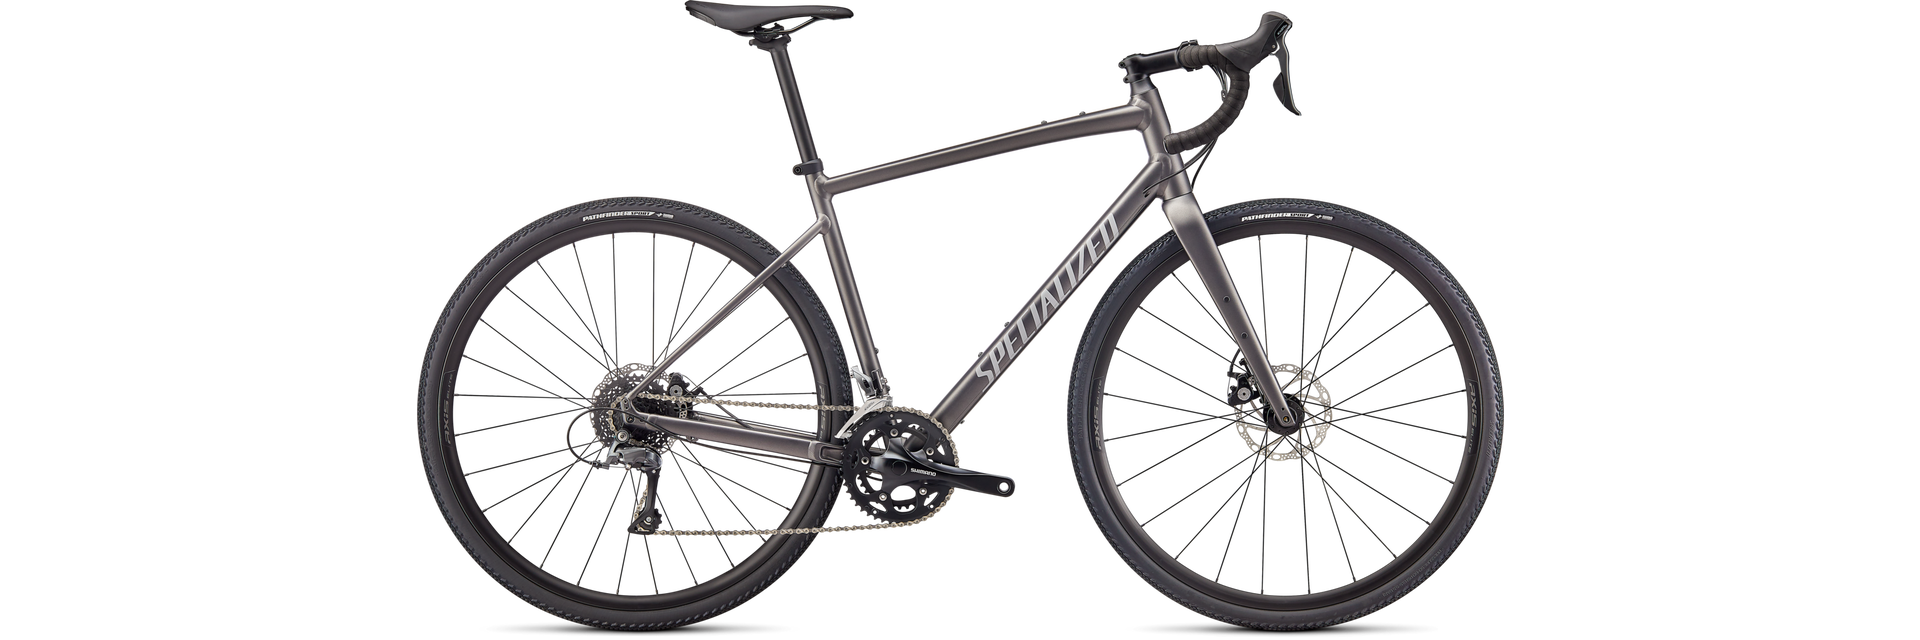 SPECIALIZED Diverge E5 Bike, 54cm Satin Smoke/Cool Grey/Chrome/Clean Smk/clgry/chrm